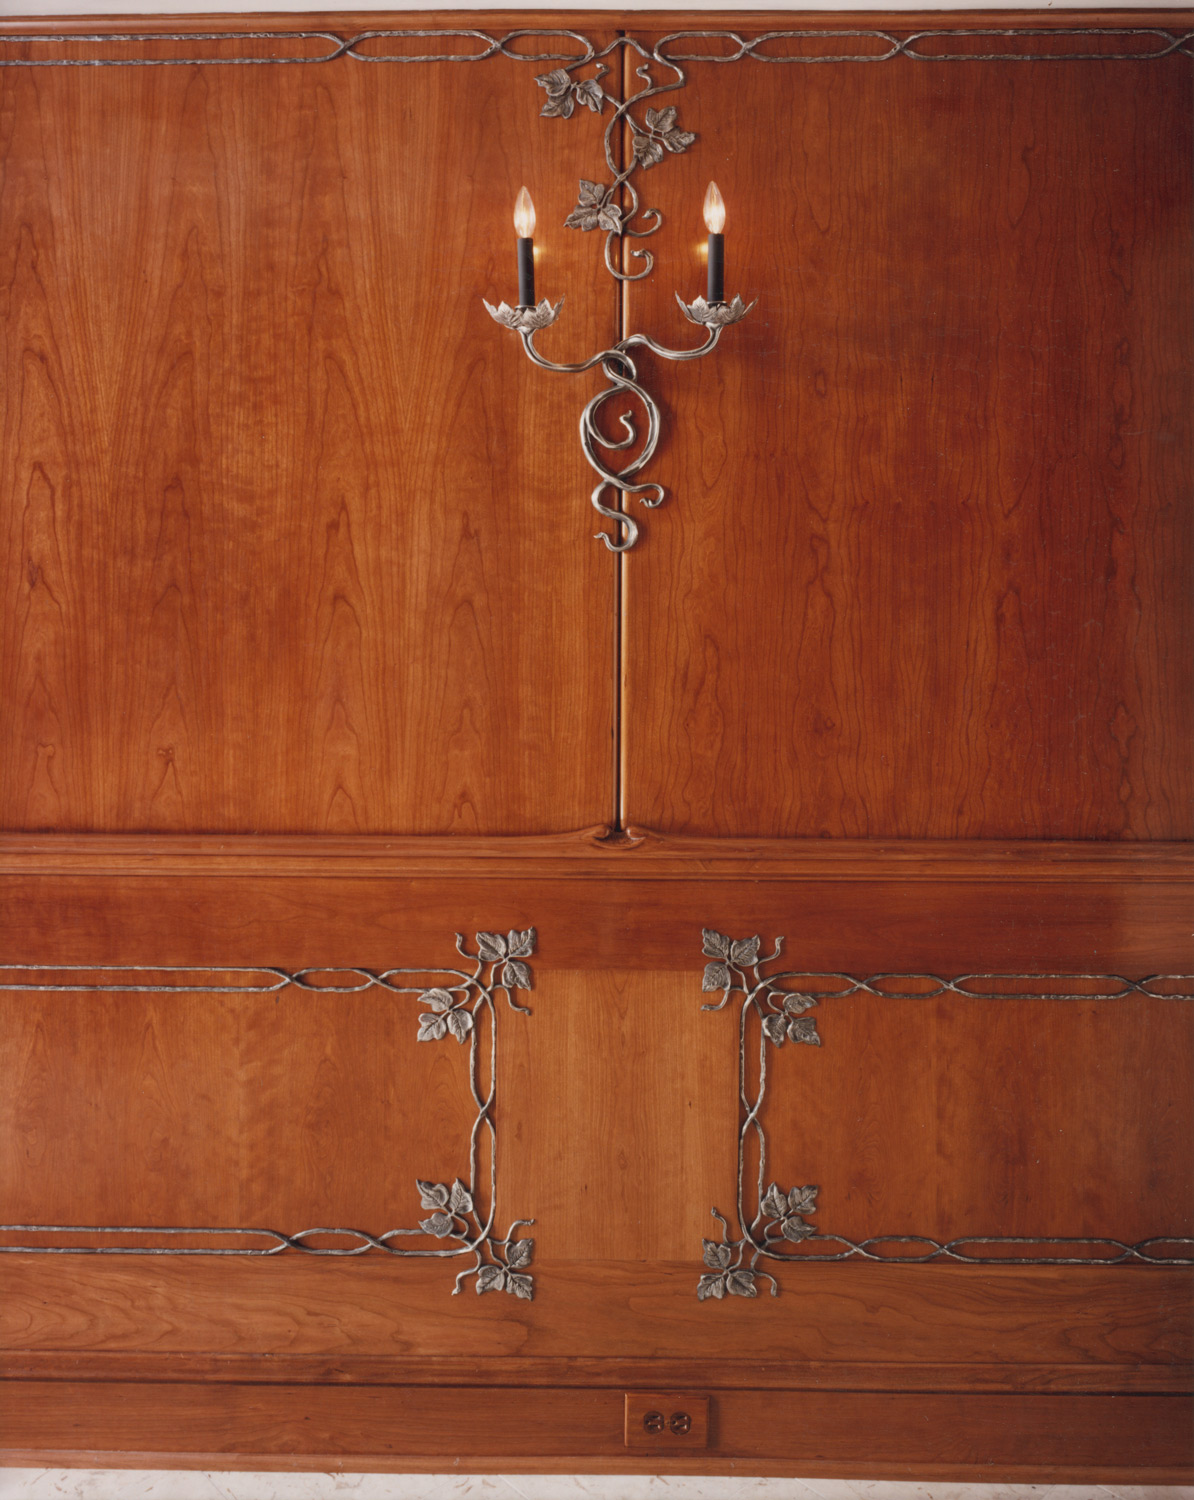 Sconce and Hand-Carved Chair Rail